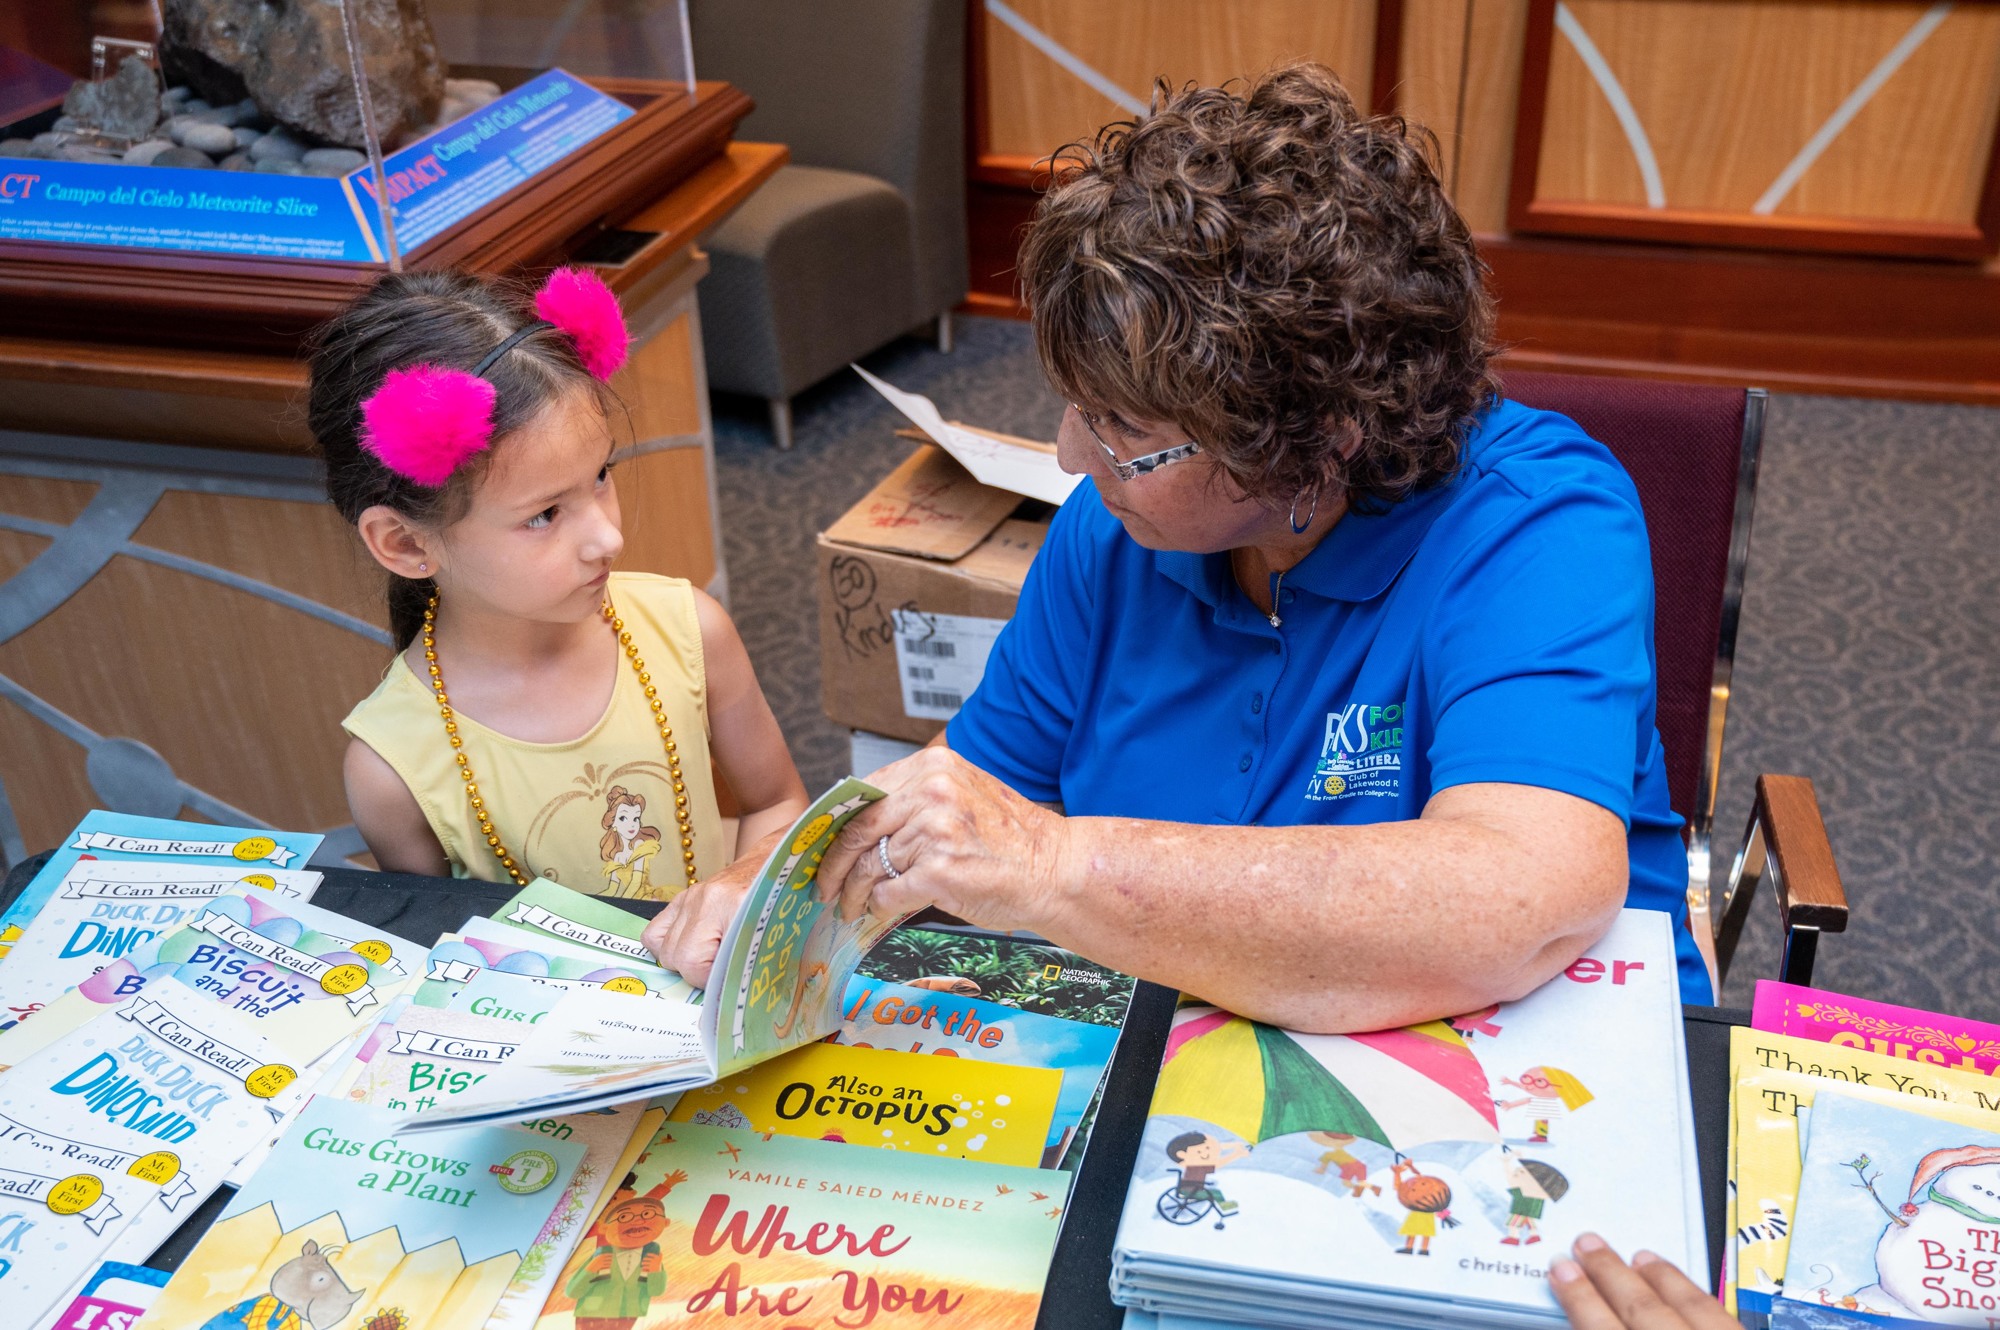 Volunteer Judy Handleman shares a book with Ariel Trego at a Books for Kids’ event in July at The Bishop Museum of Science and Nature. (Photo by Lori Sax)